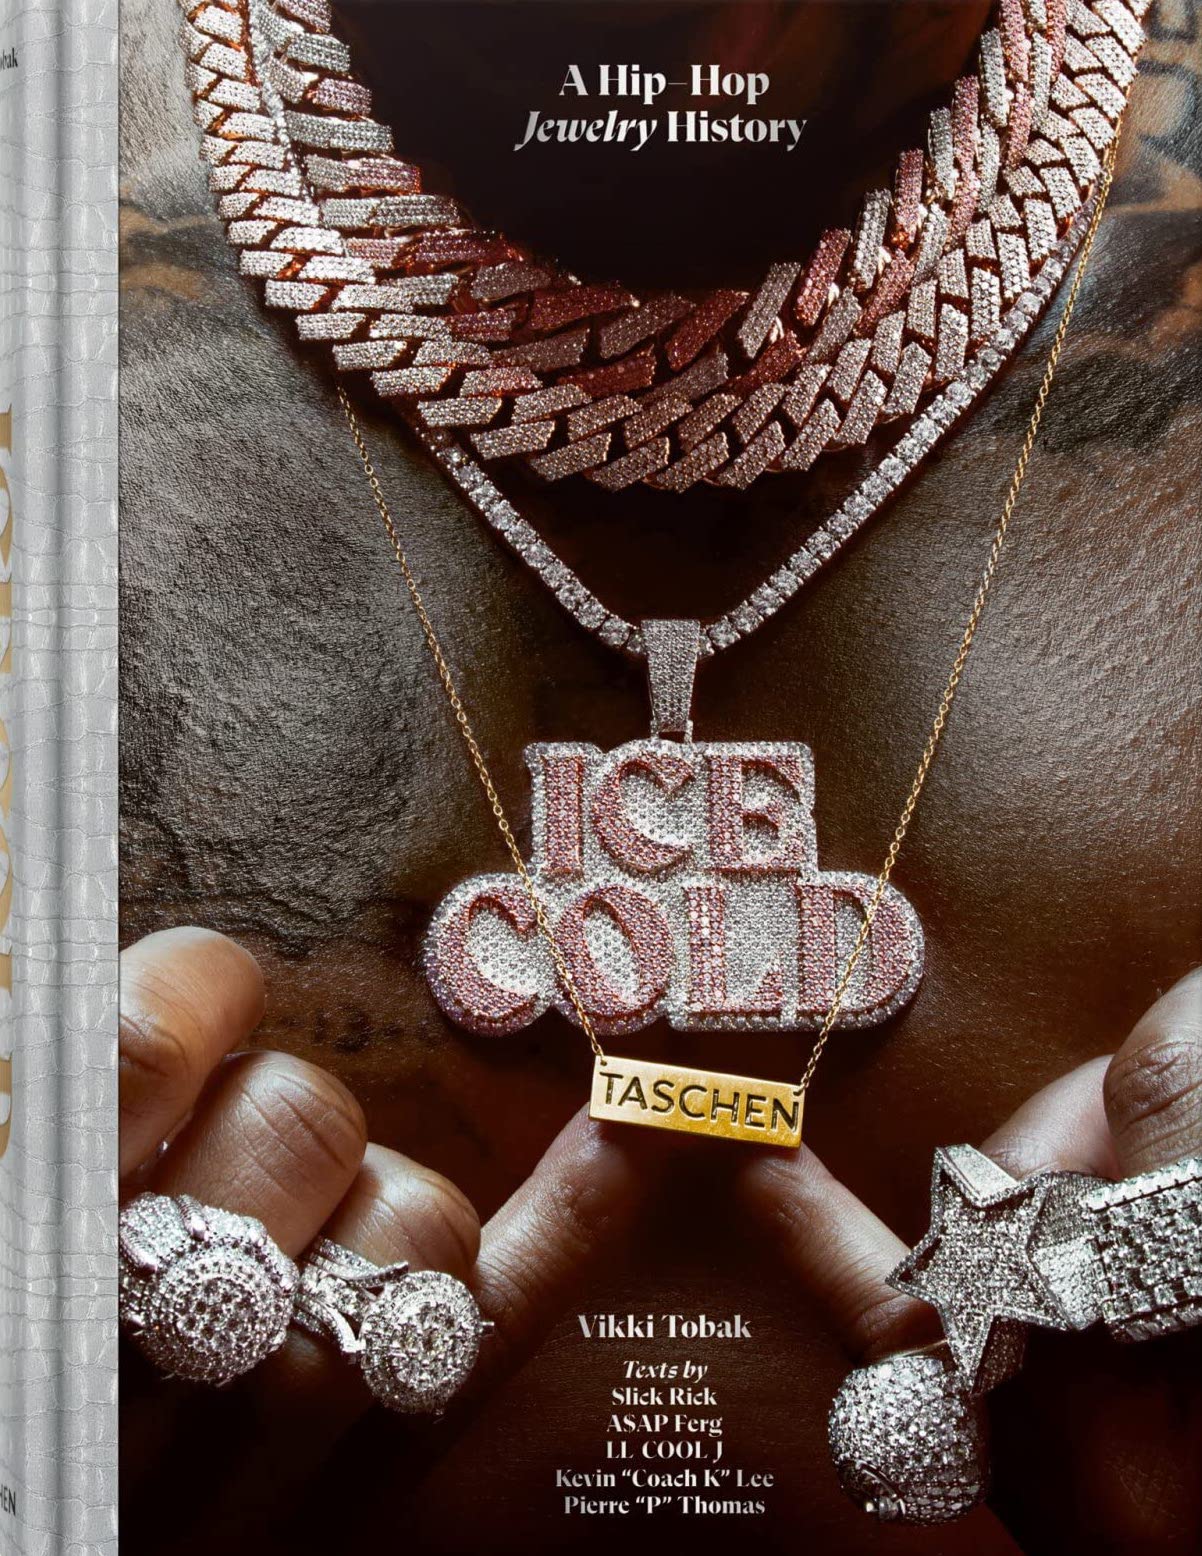 Ice Cold. // a Hip-Hop Jewelry History